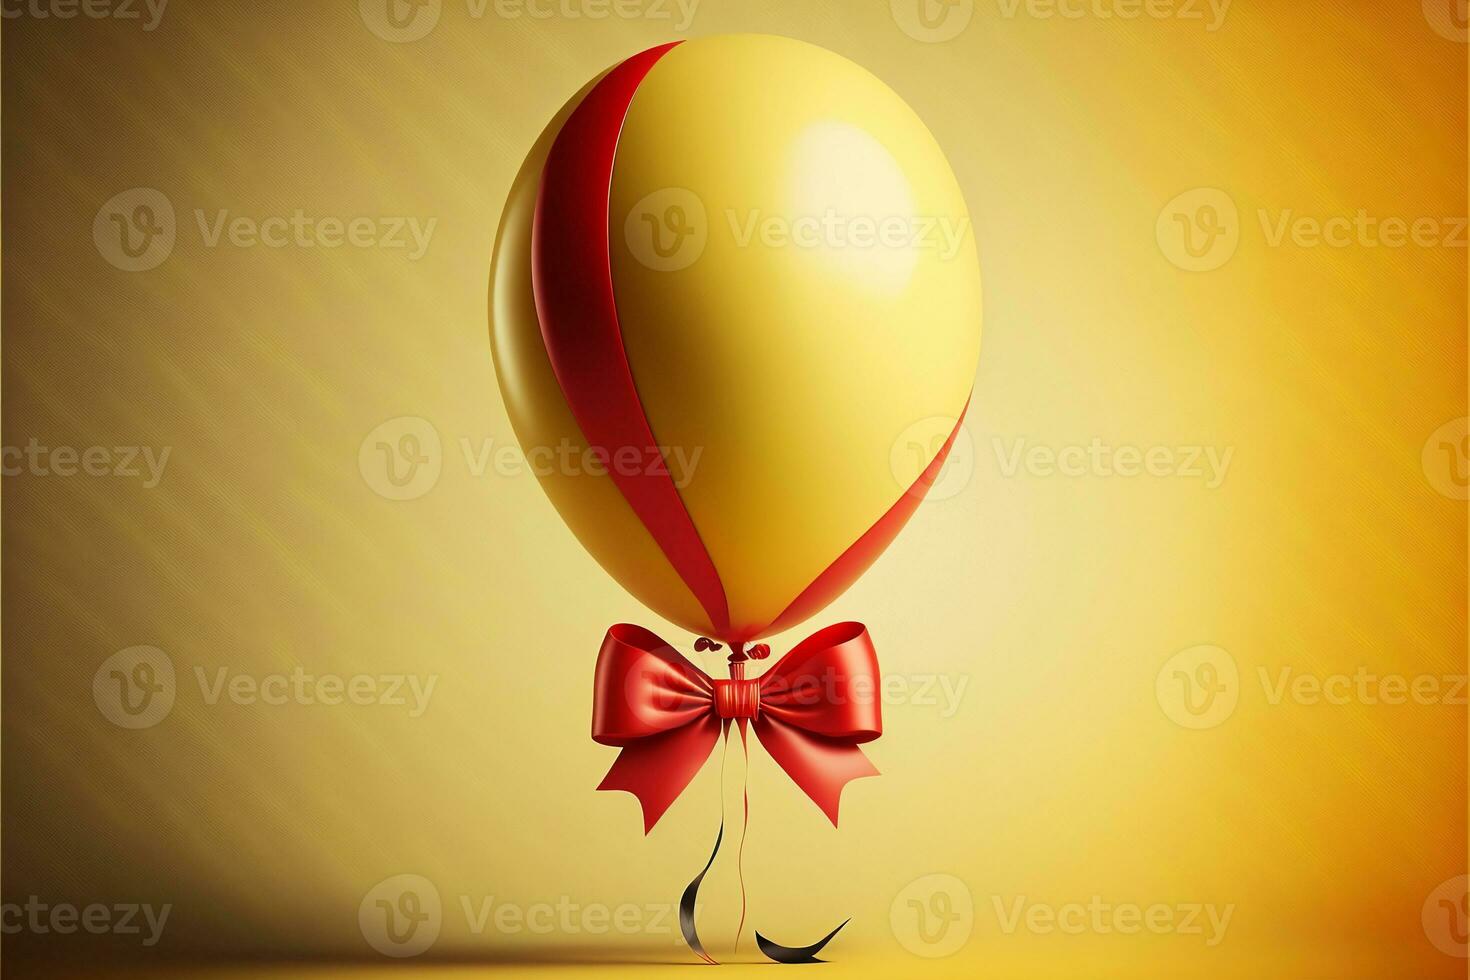 3D Render, Glossy Balloon With Red Ribbon On Yellow Stripe Background. photo